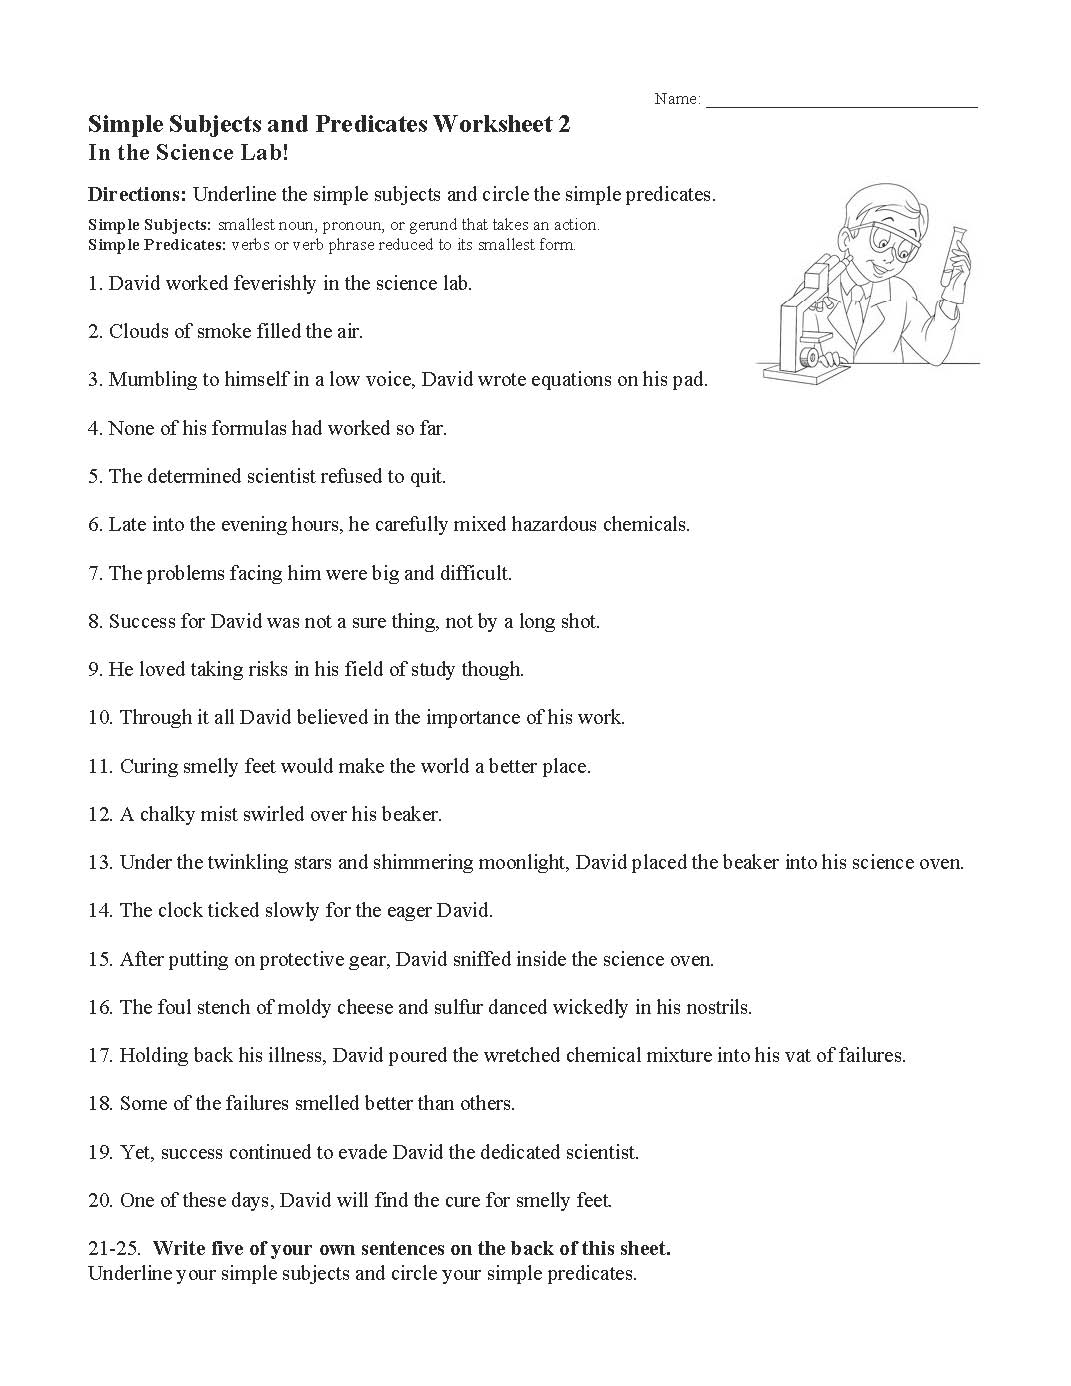 This is a preview image of Simple Subjects and Predicates Worksheet 2. Click on it to enlarge it or view the source file.